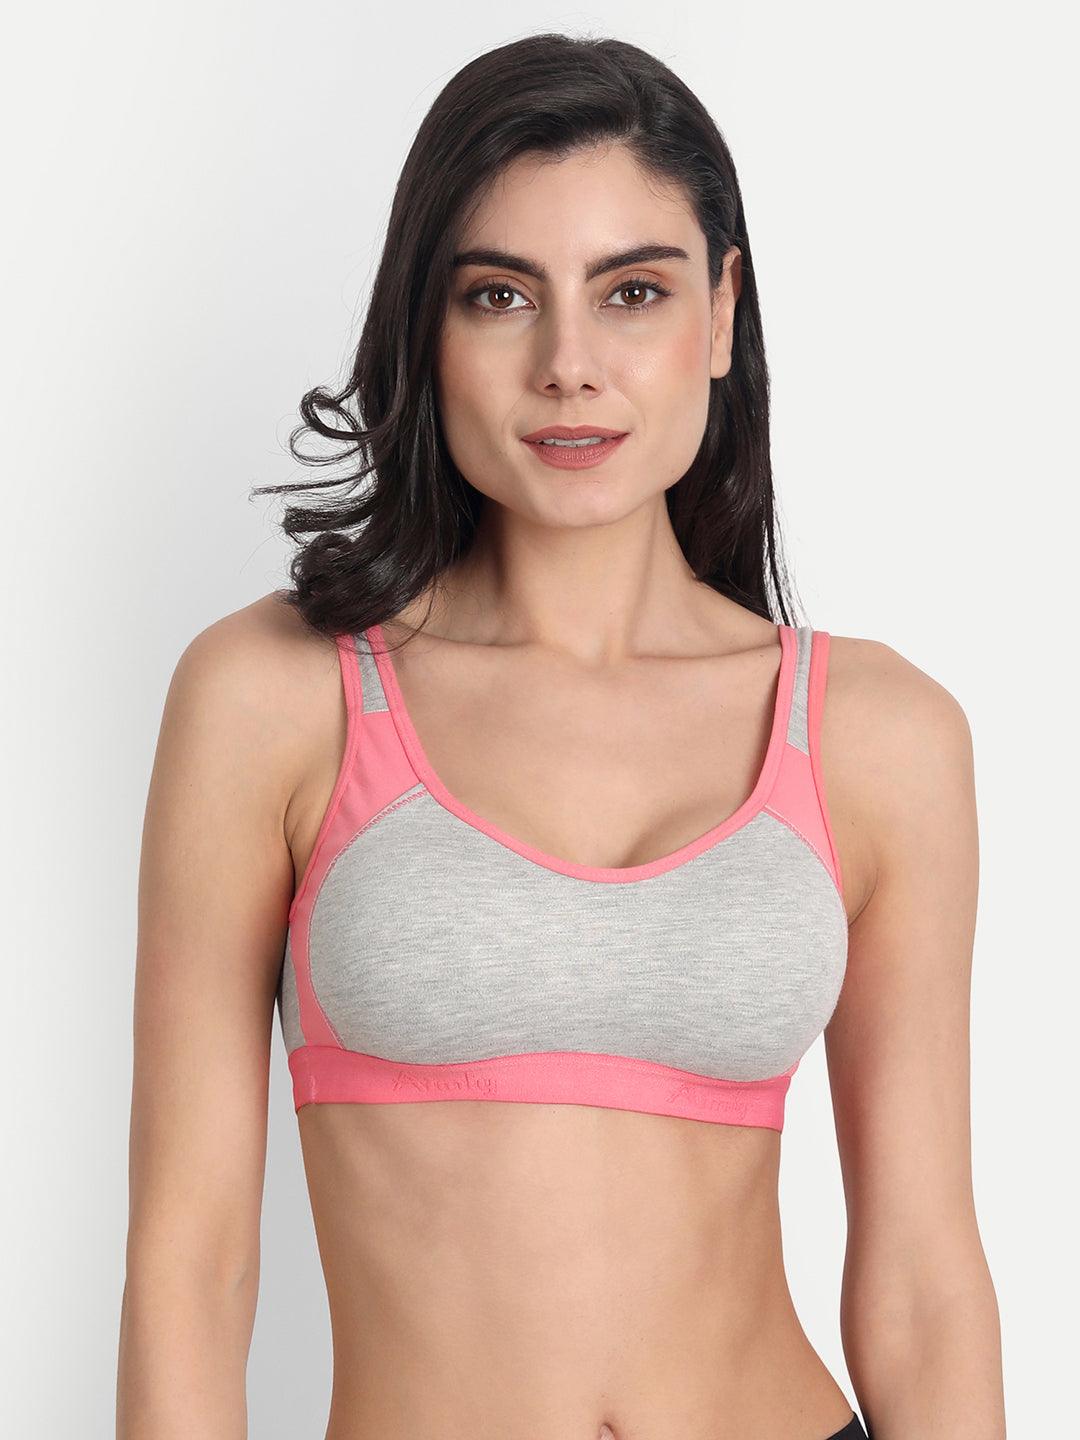 Women's Cotton with Lycra Non-Paded and Non-Wired Seamed Sports